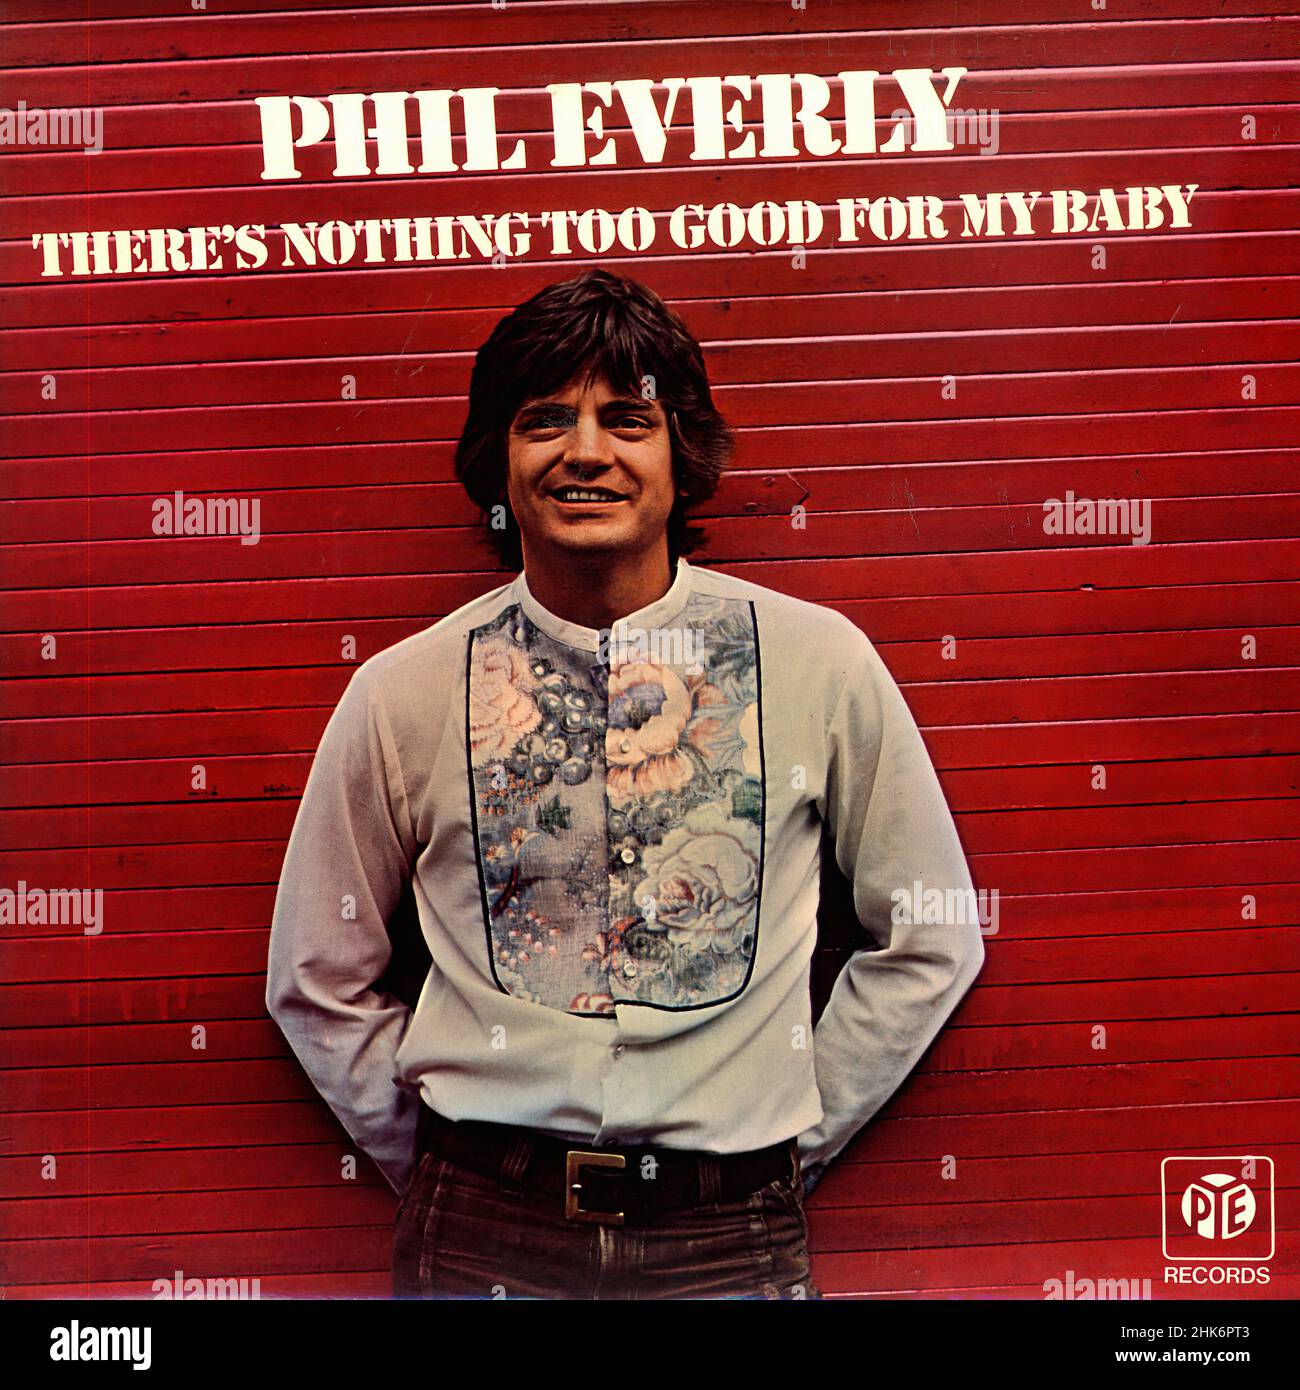 Vintage vinyl record cover - 1974 - Everly, Phil - There's Nothing Too Good... - UK Stock Photo